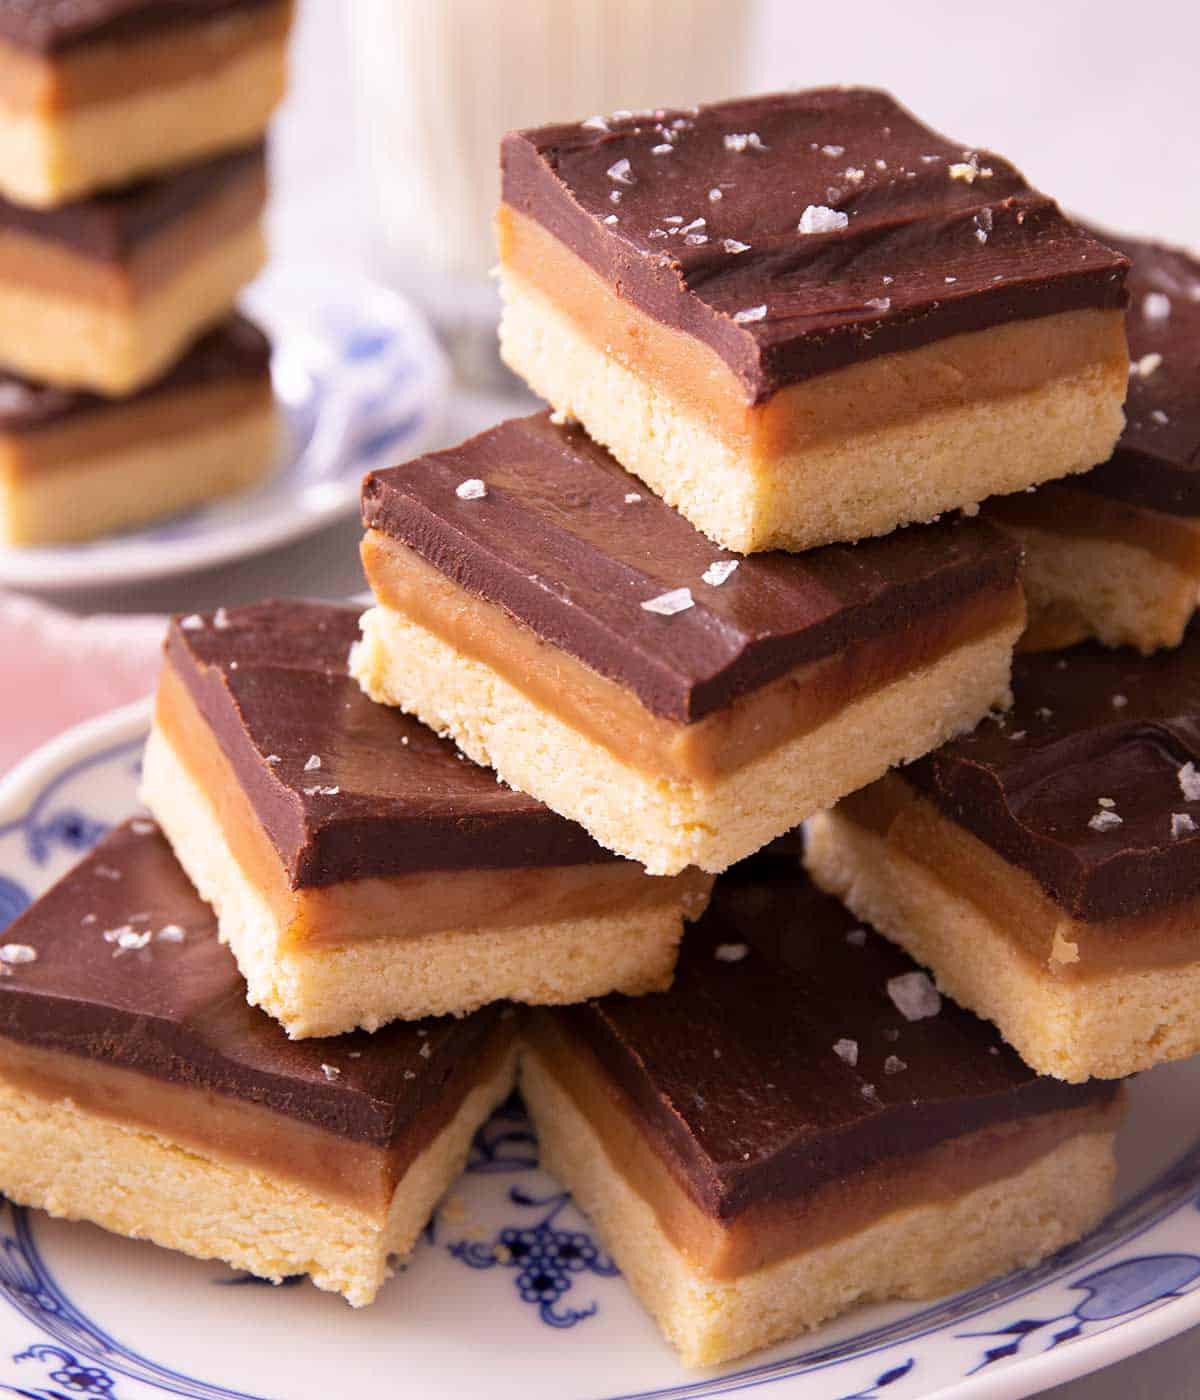 A stack of Millionaire's Shortbread on a blue plate